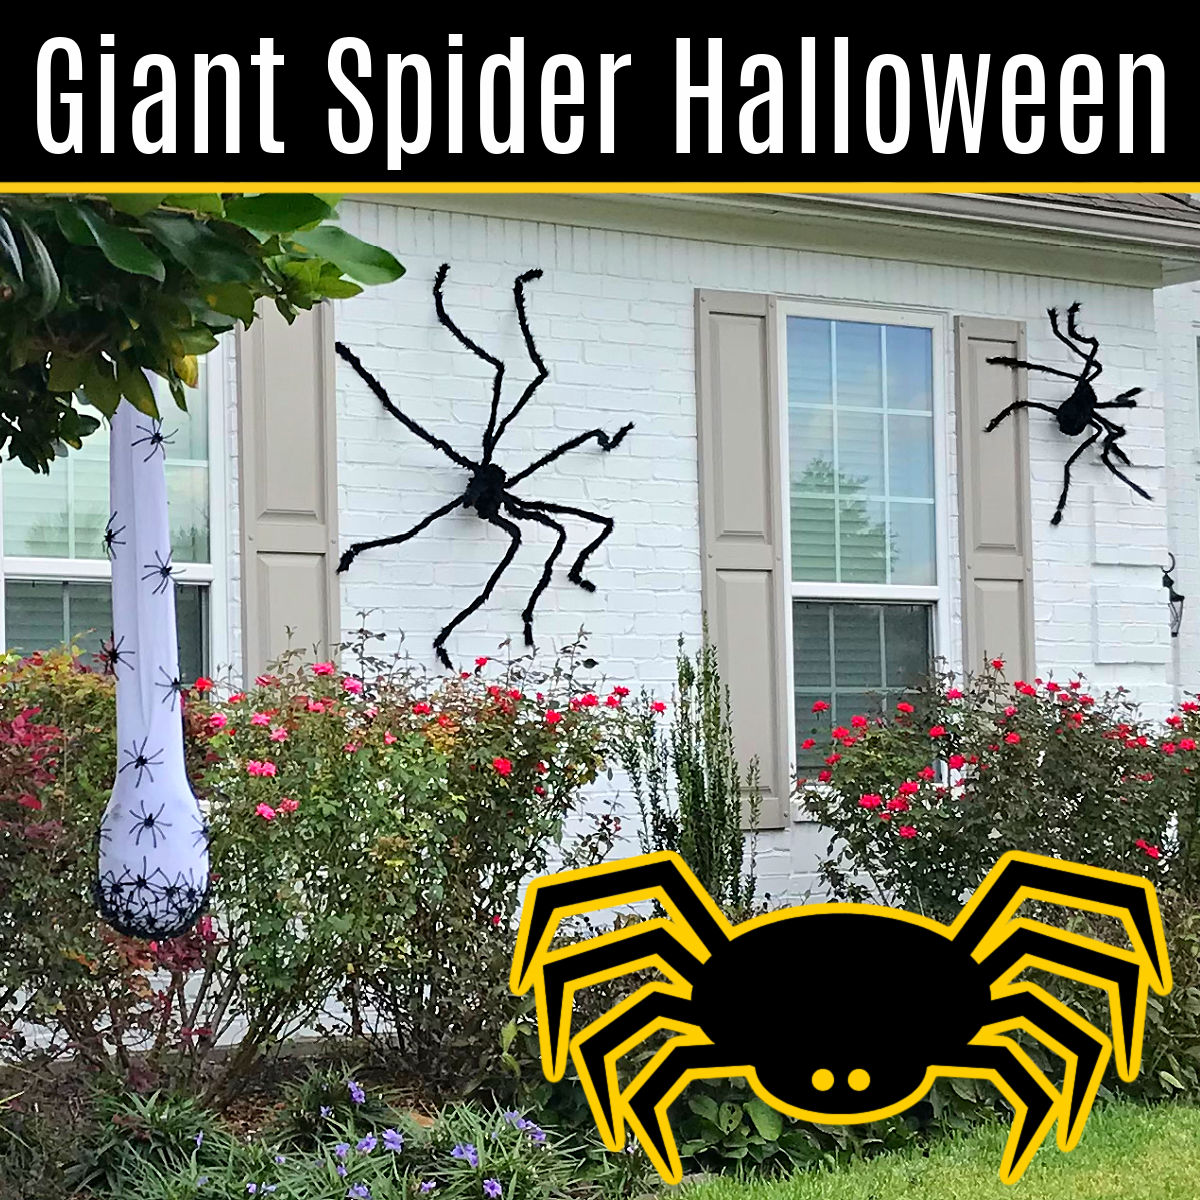 How to Hang Giant Spider Decorations: Easy Outdoor Halloween Idea ...